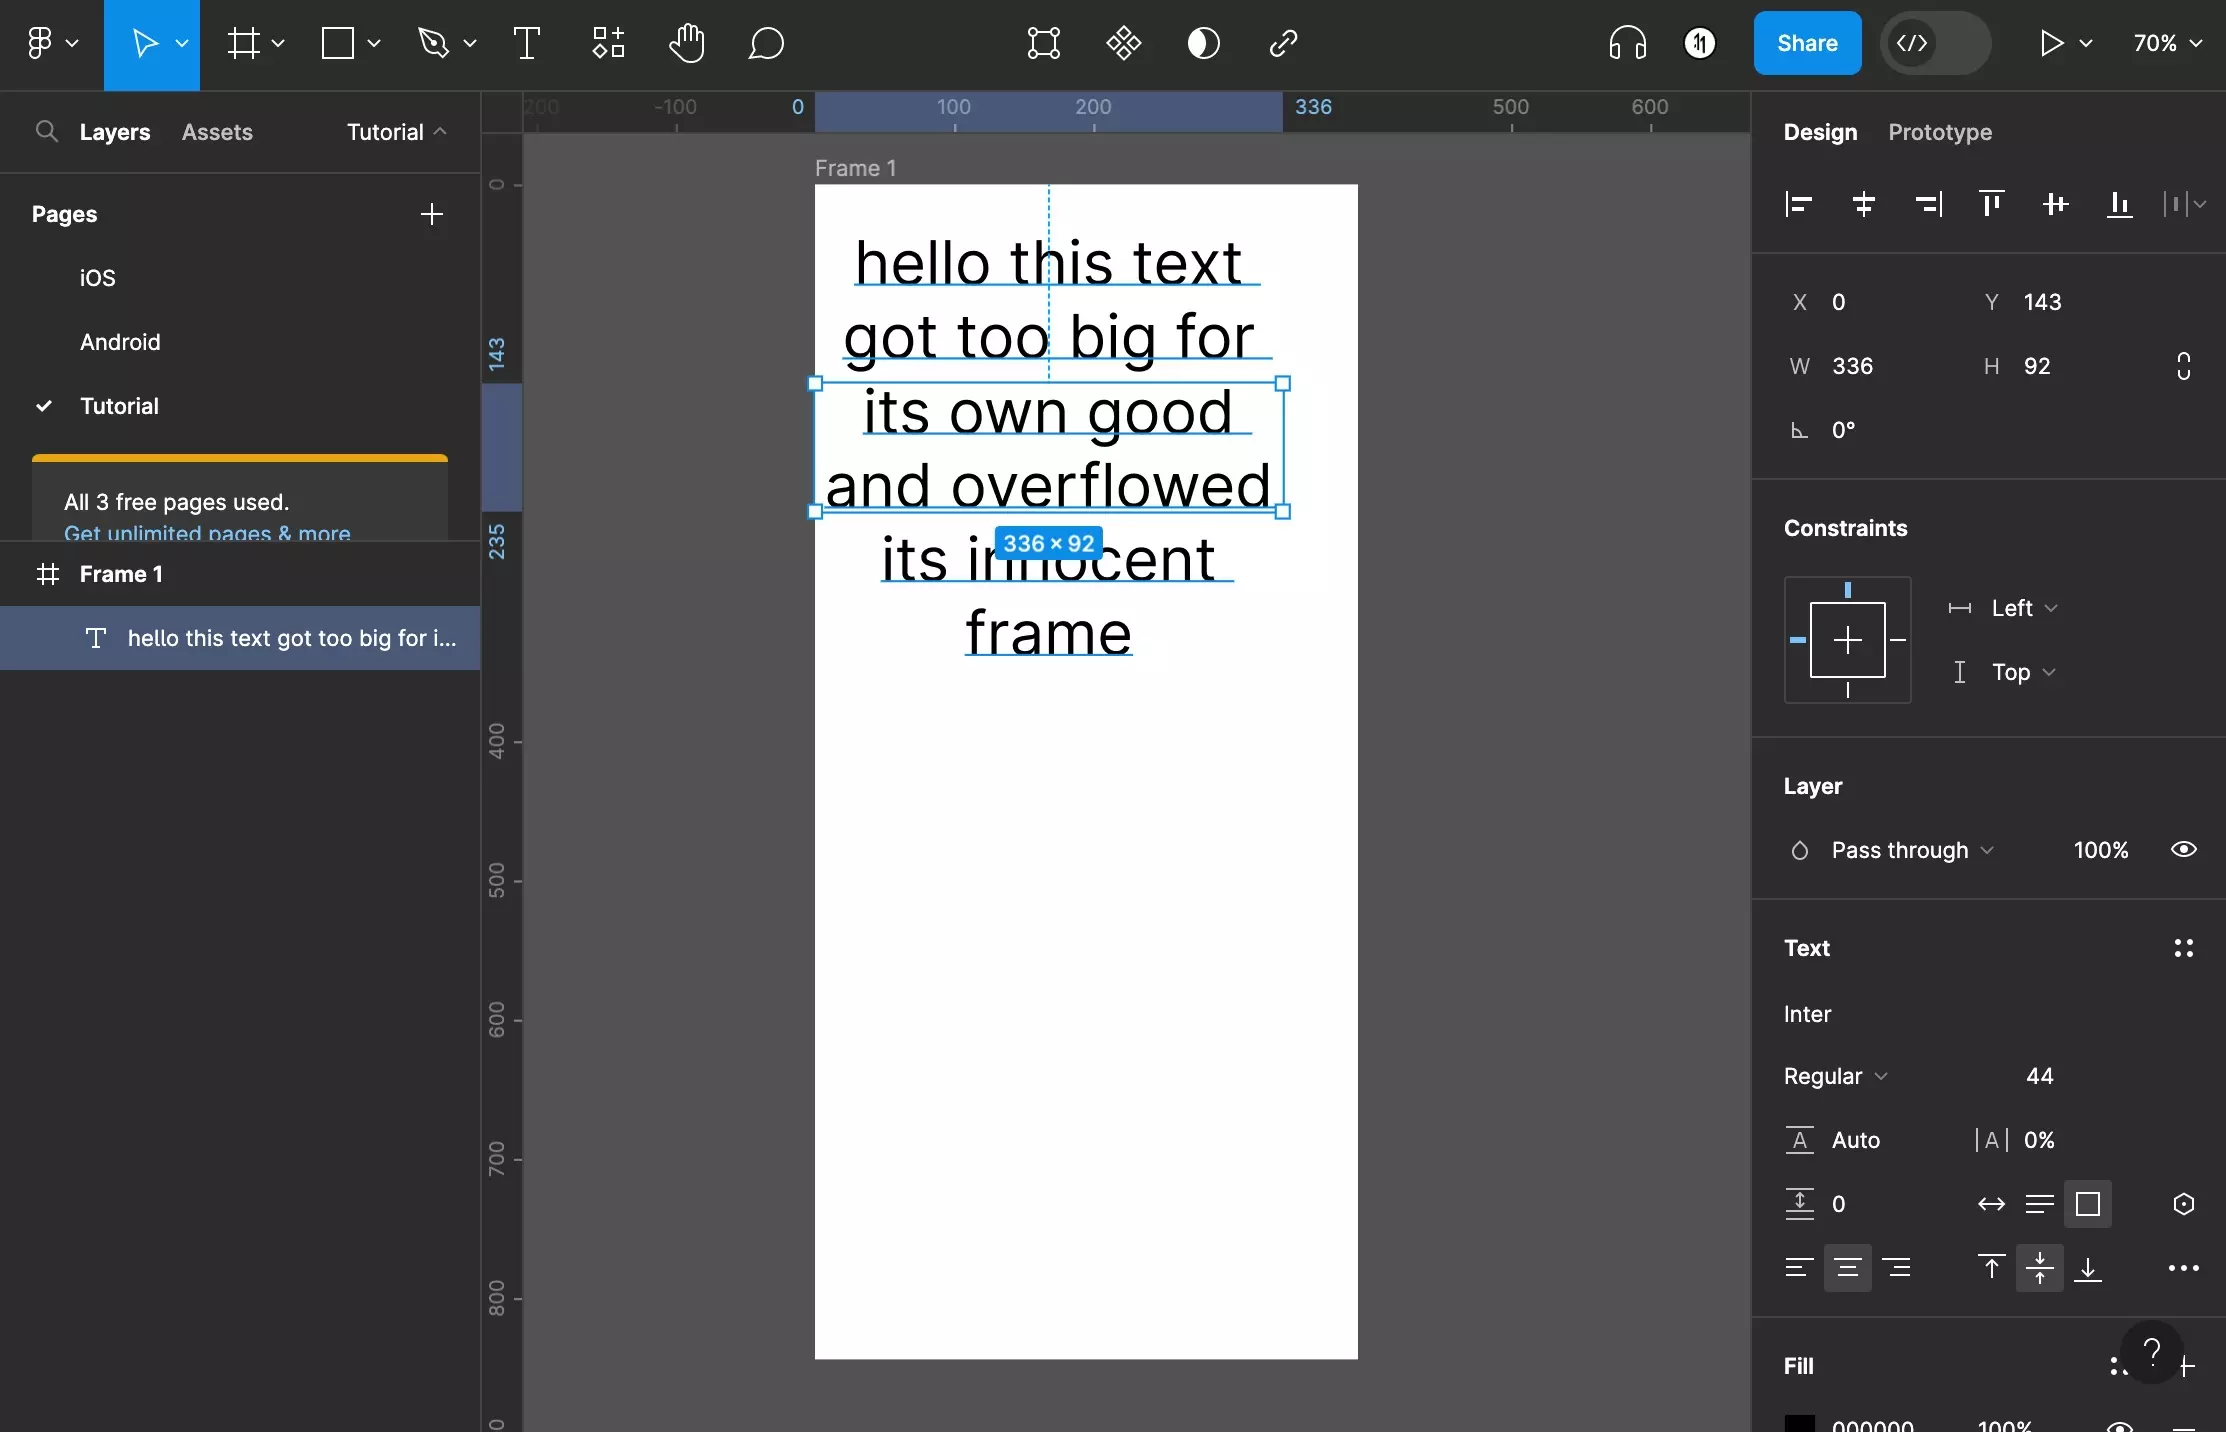 A screenshot of Figma showing a text frame selected. The text within the frame is overflowing the boundaries of the text frame.